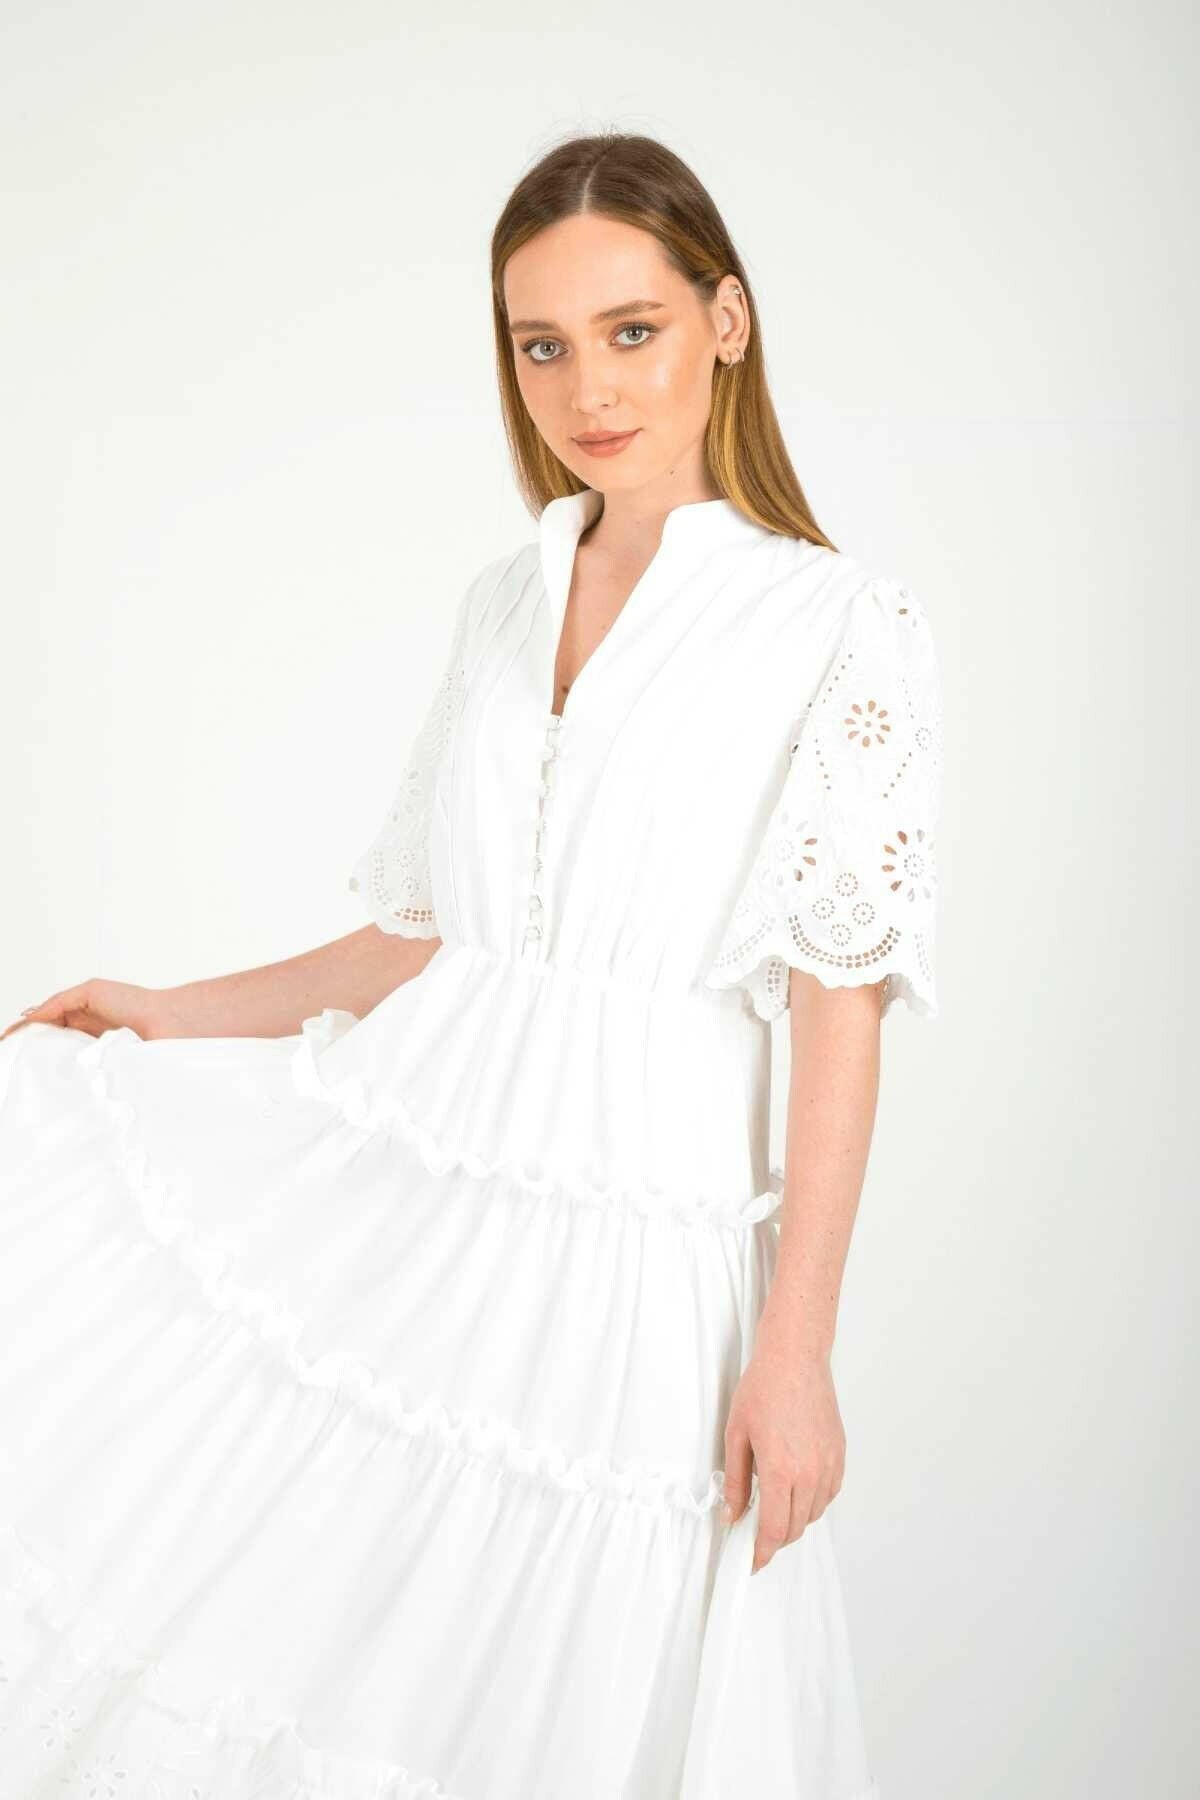 The Iris dress is a must-have for your next special event  By Baano   